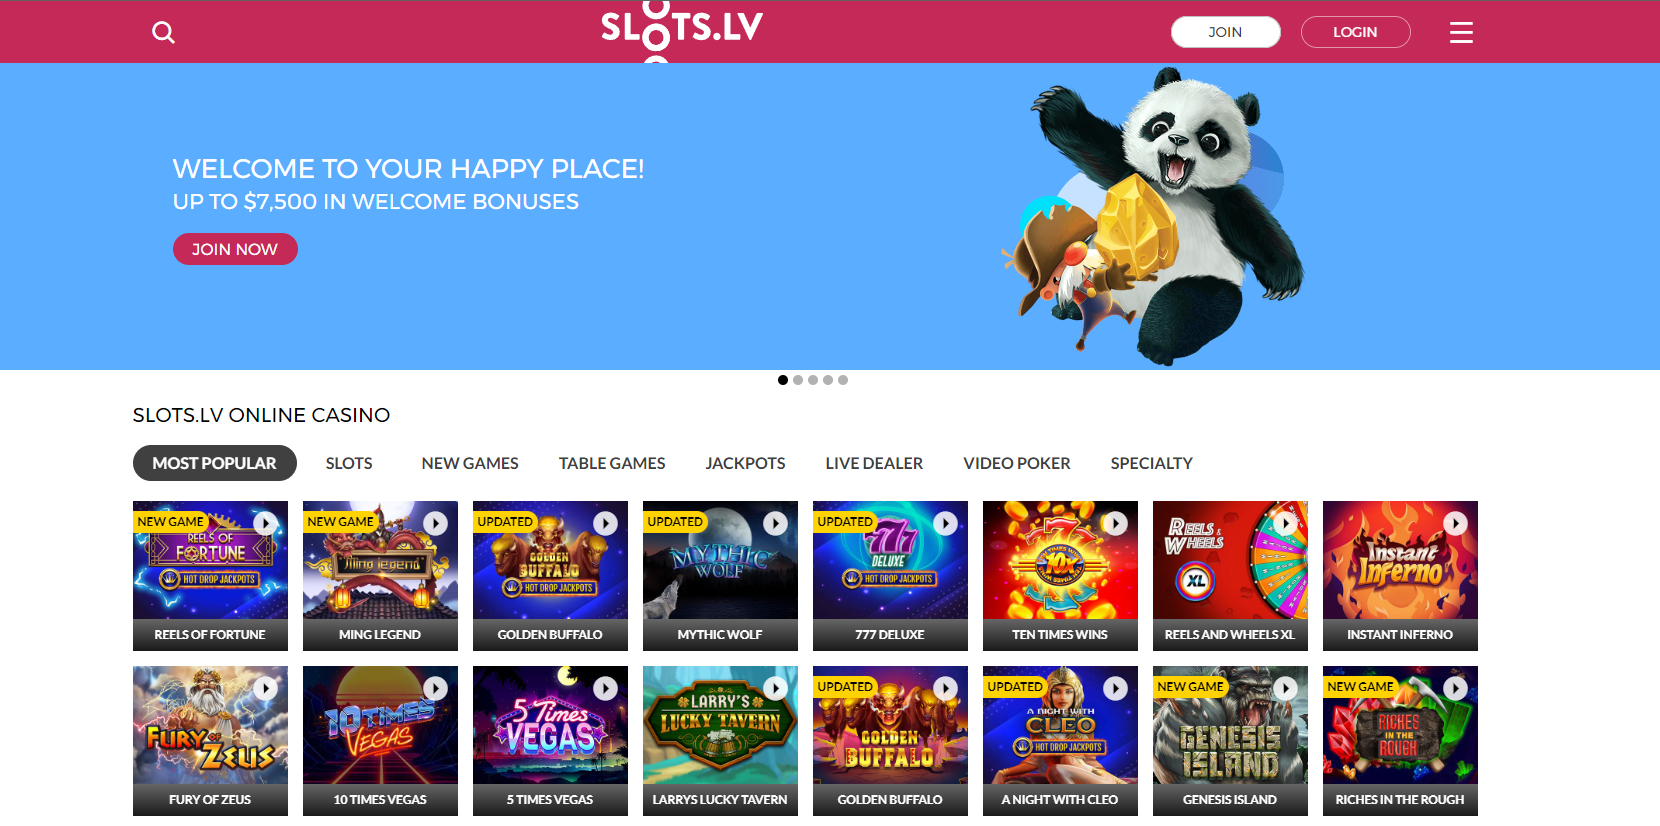 Slots.Iv Casino with no deposit bonus codes cute panda trying to eat a leaf | Online Casinos with No Deposit Bonus Codes 2022